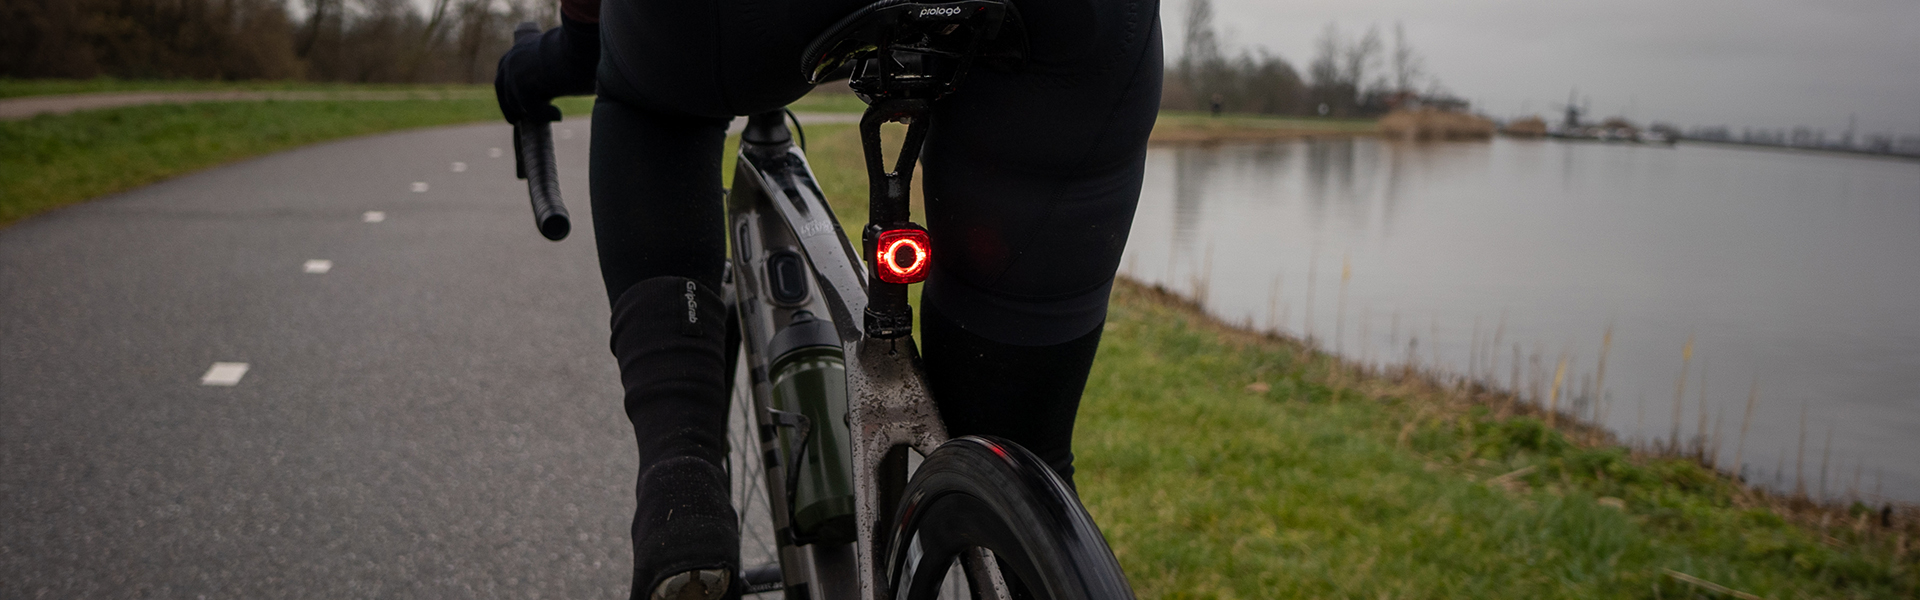 Sate-lite CREE ebike light eletric bike tail light with StVZO  reflector mount on Carrier